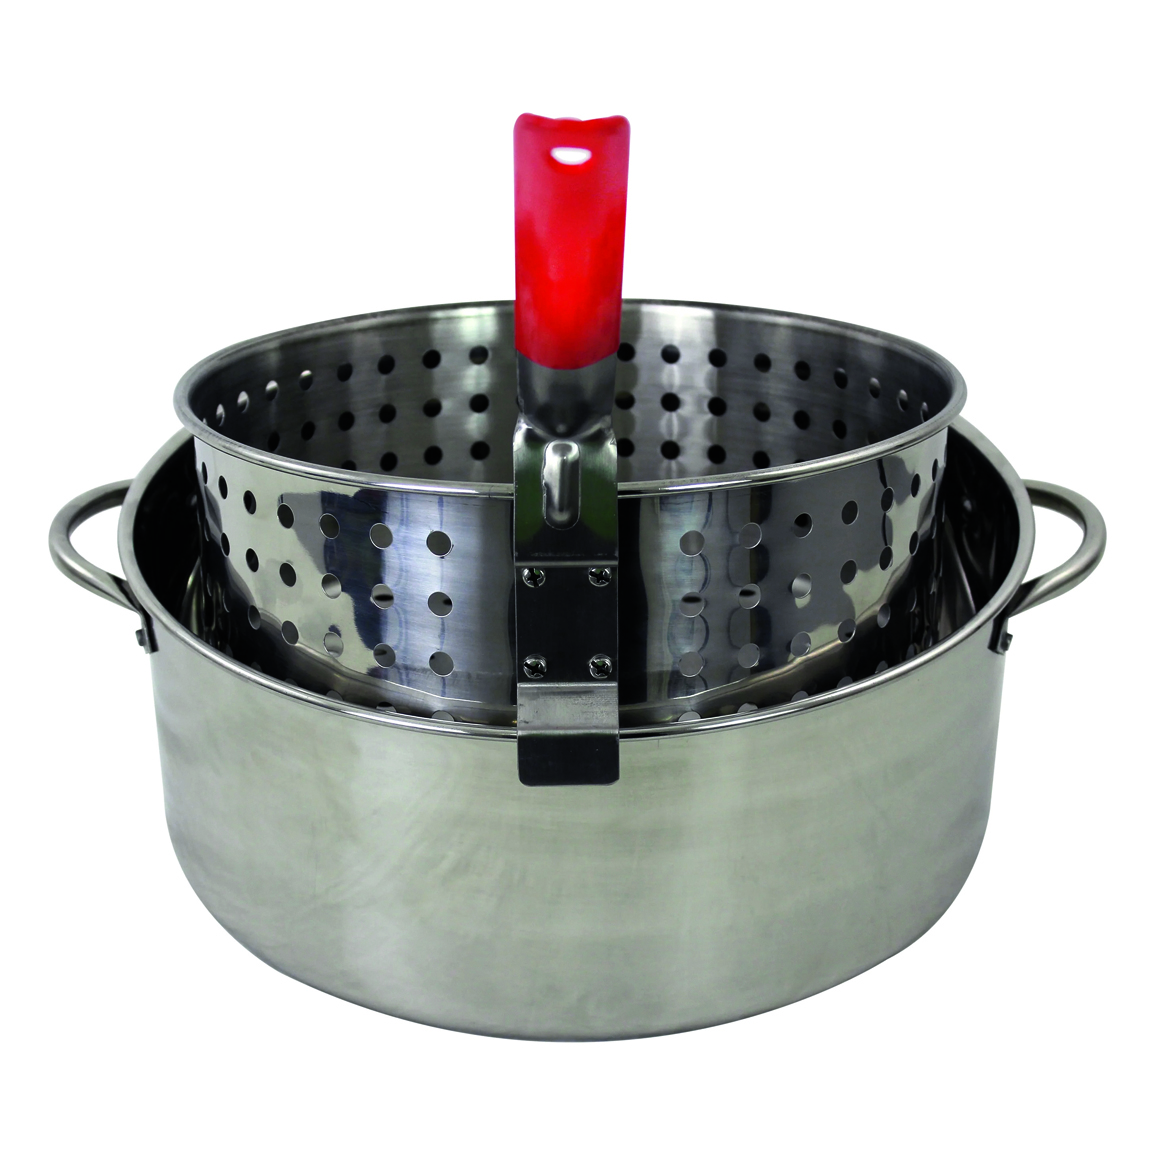 Chard 10.5-qt. Stainless Steel Pot with Strainer Basket